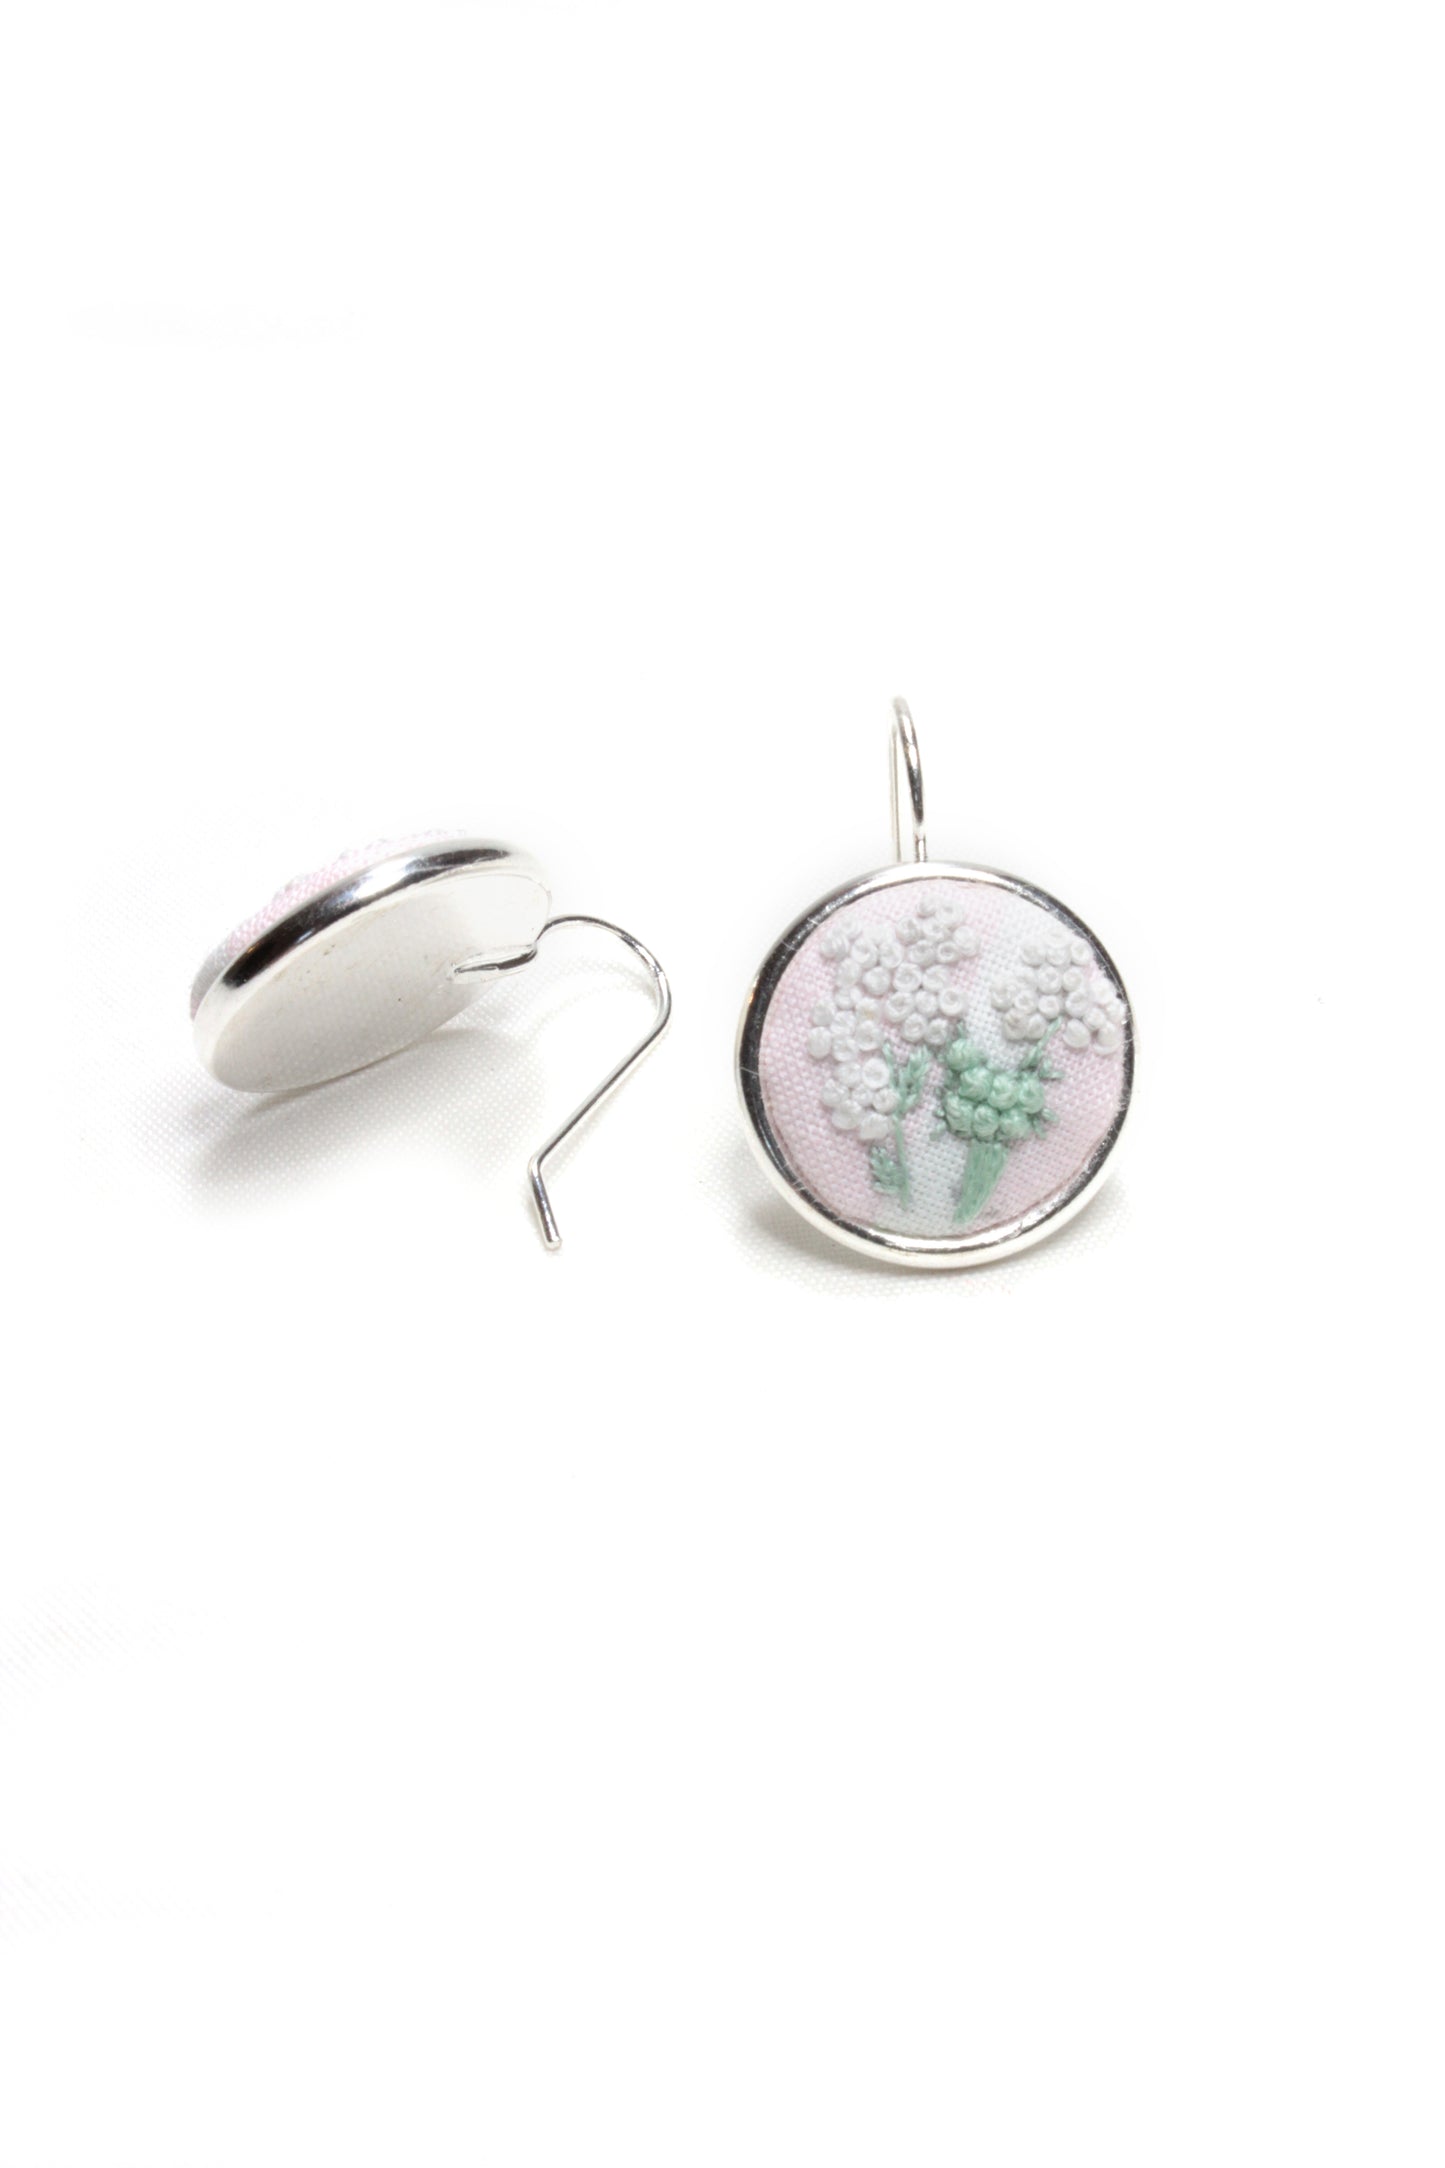 Embroidery White & Green Flowers Wire Silver Earrings